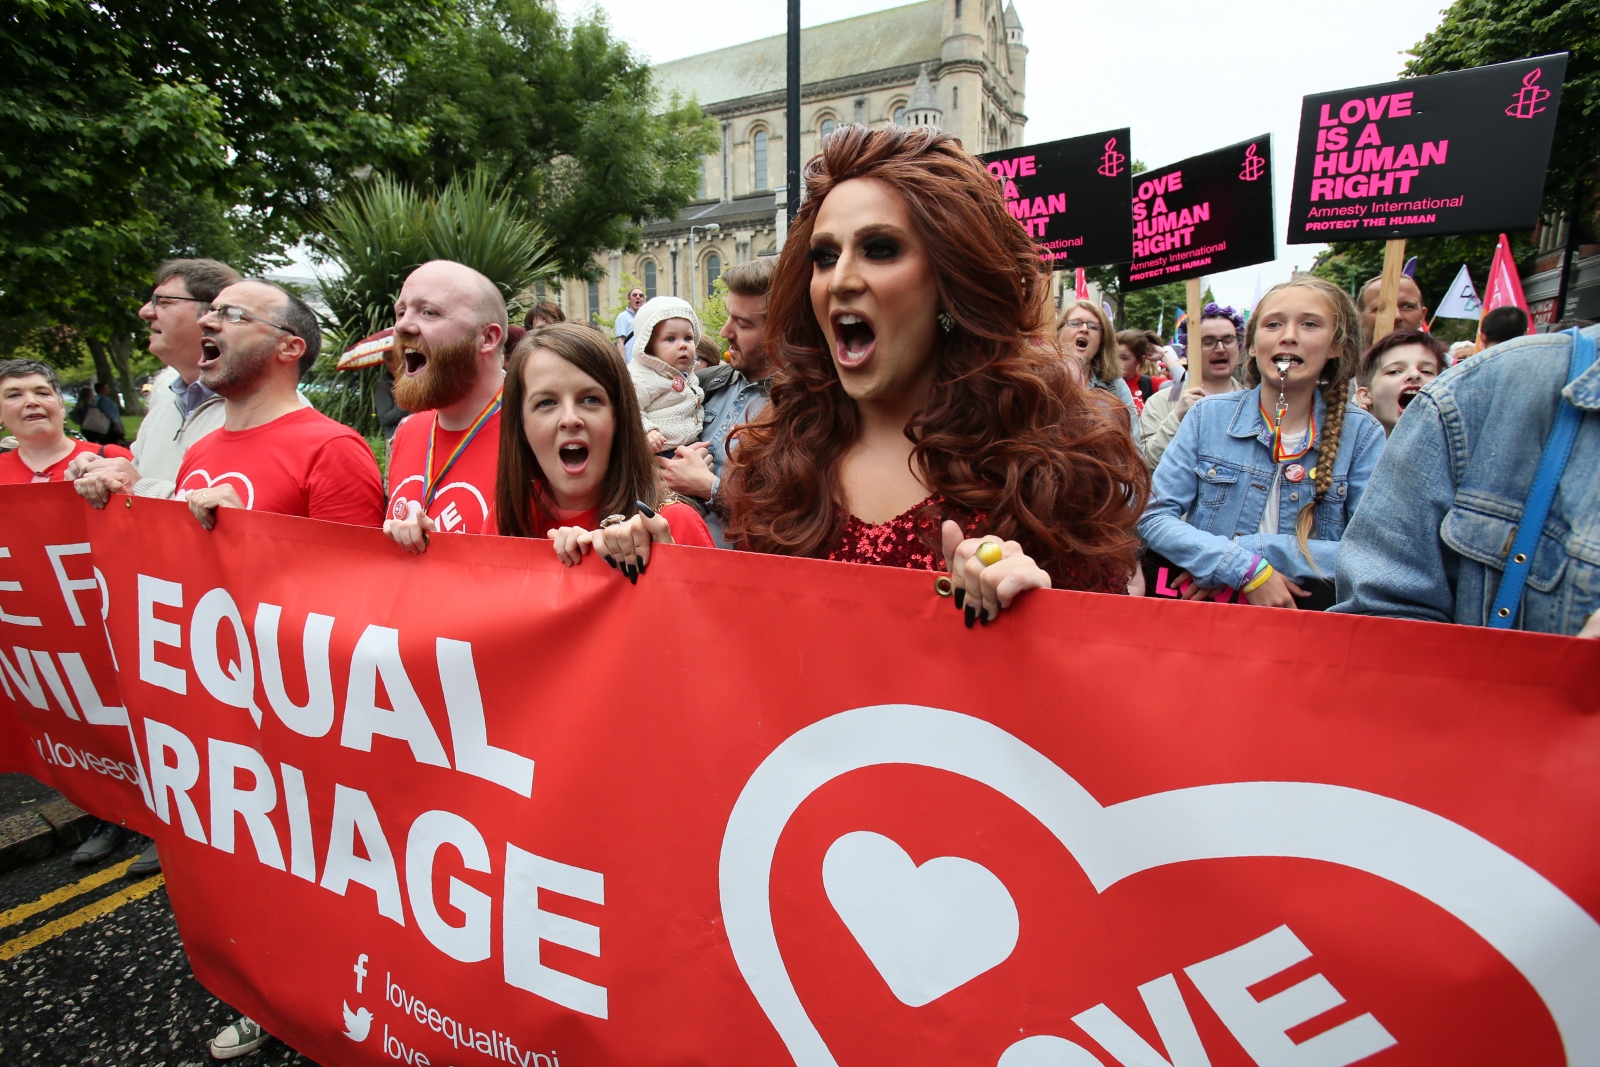 Northern Ireland Gay Rights Thousands March In Belfast Calling For